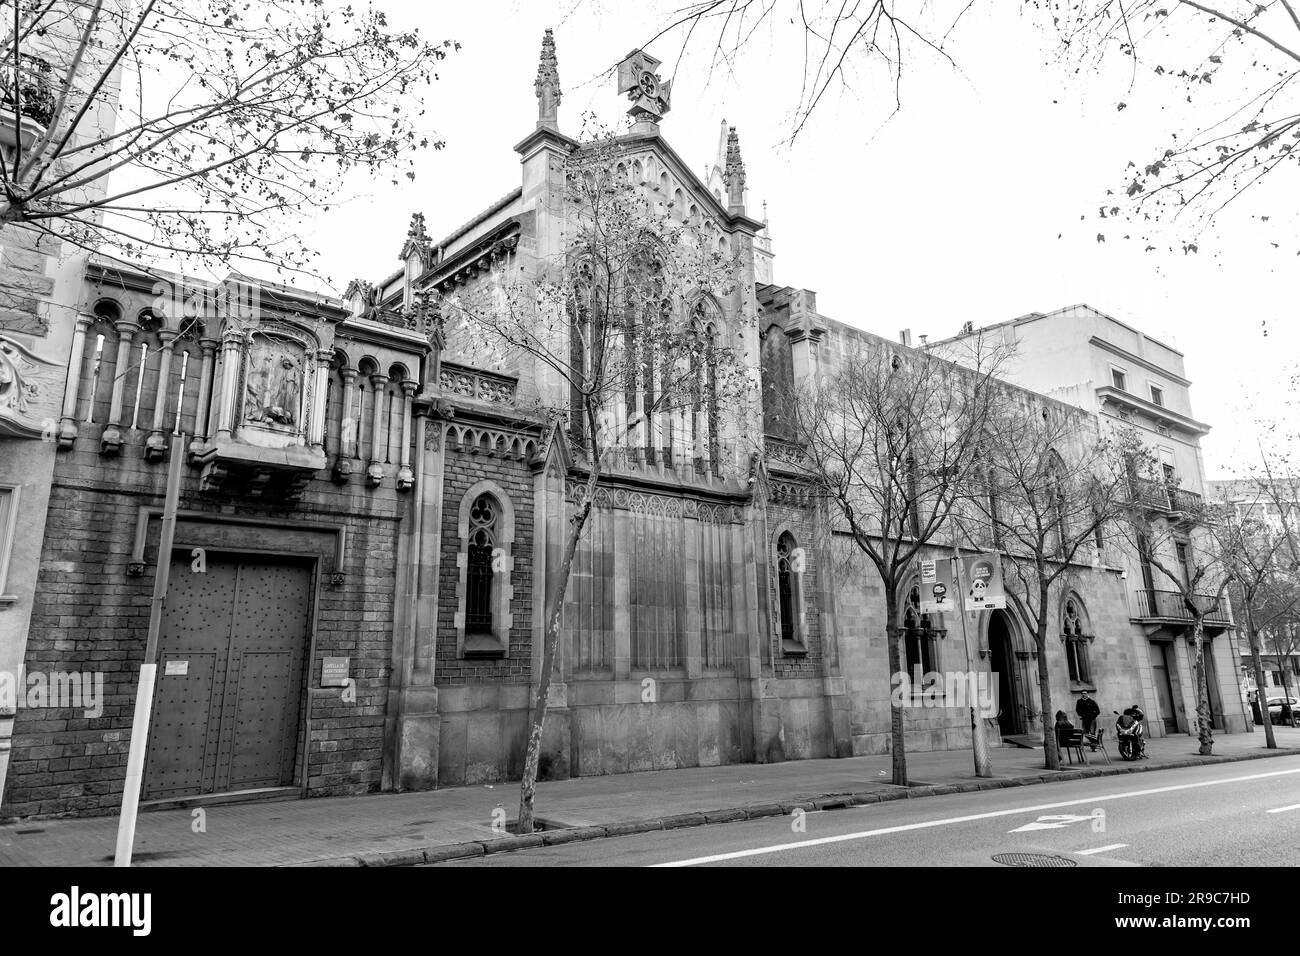 Barcelona, Spain - FEB 10, 2022: The exterior of the Basilica of the Pure Conception in Barcelona, Spain. Stock Photo